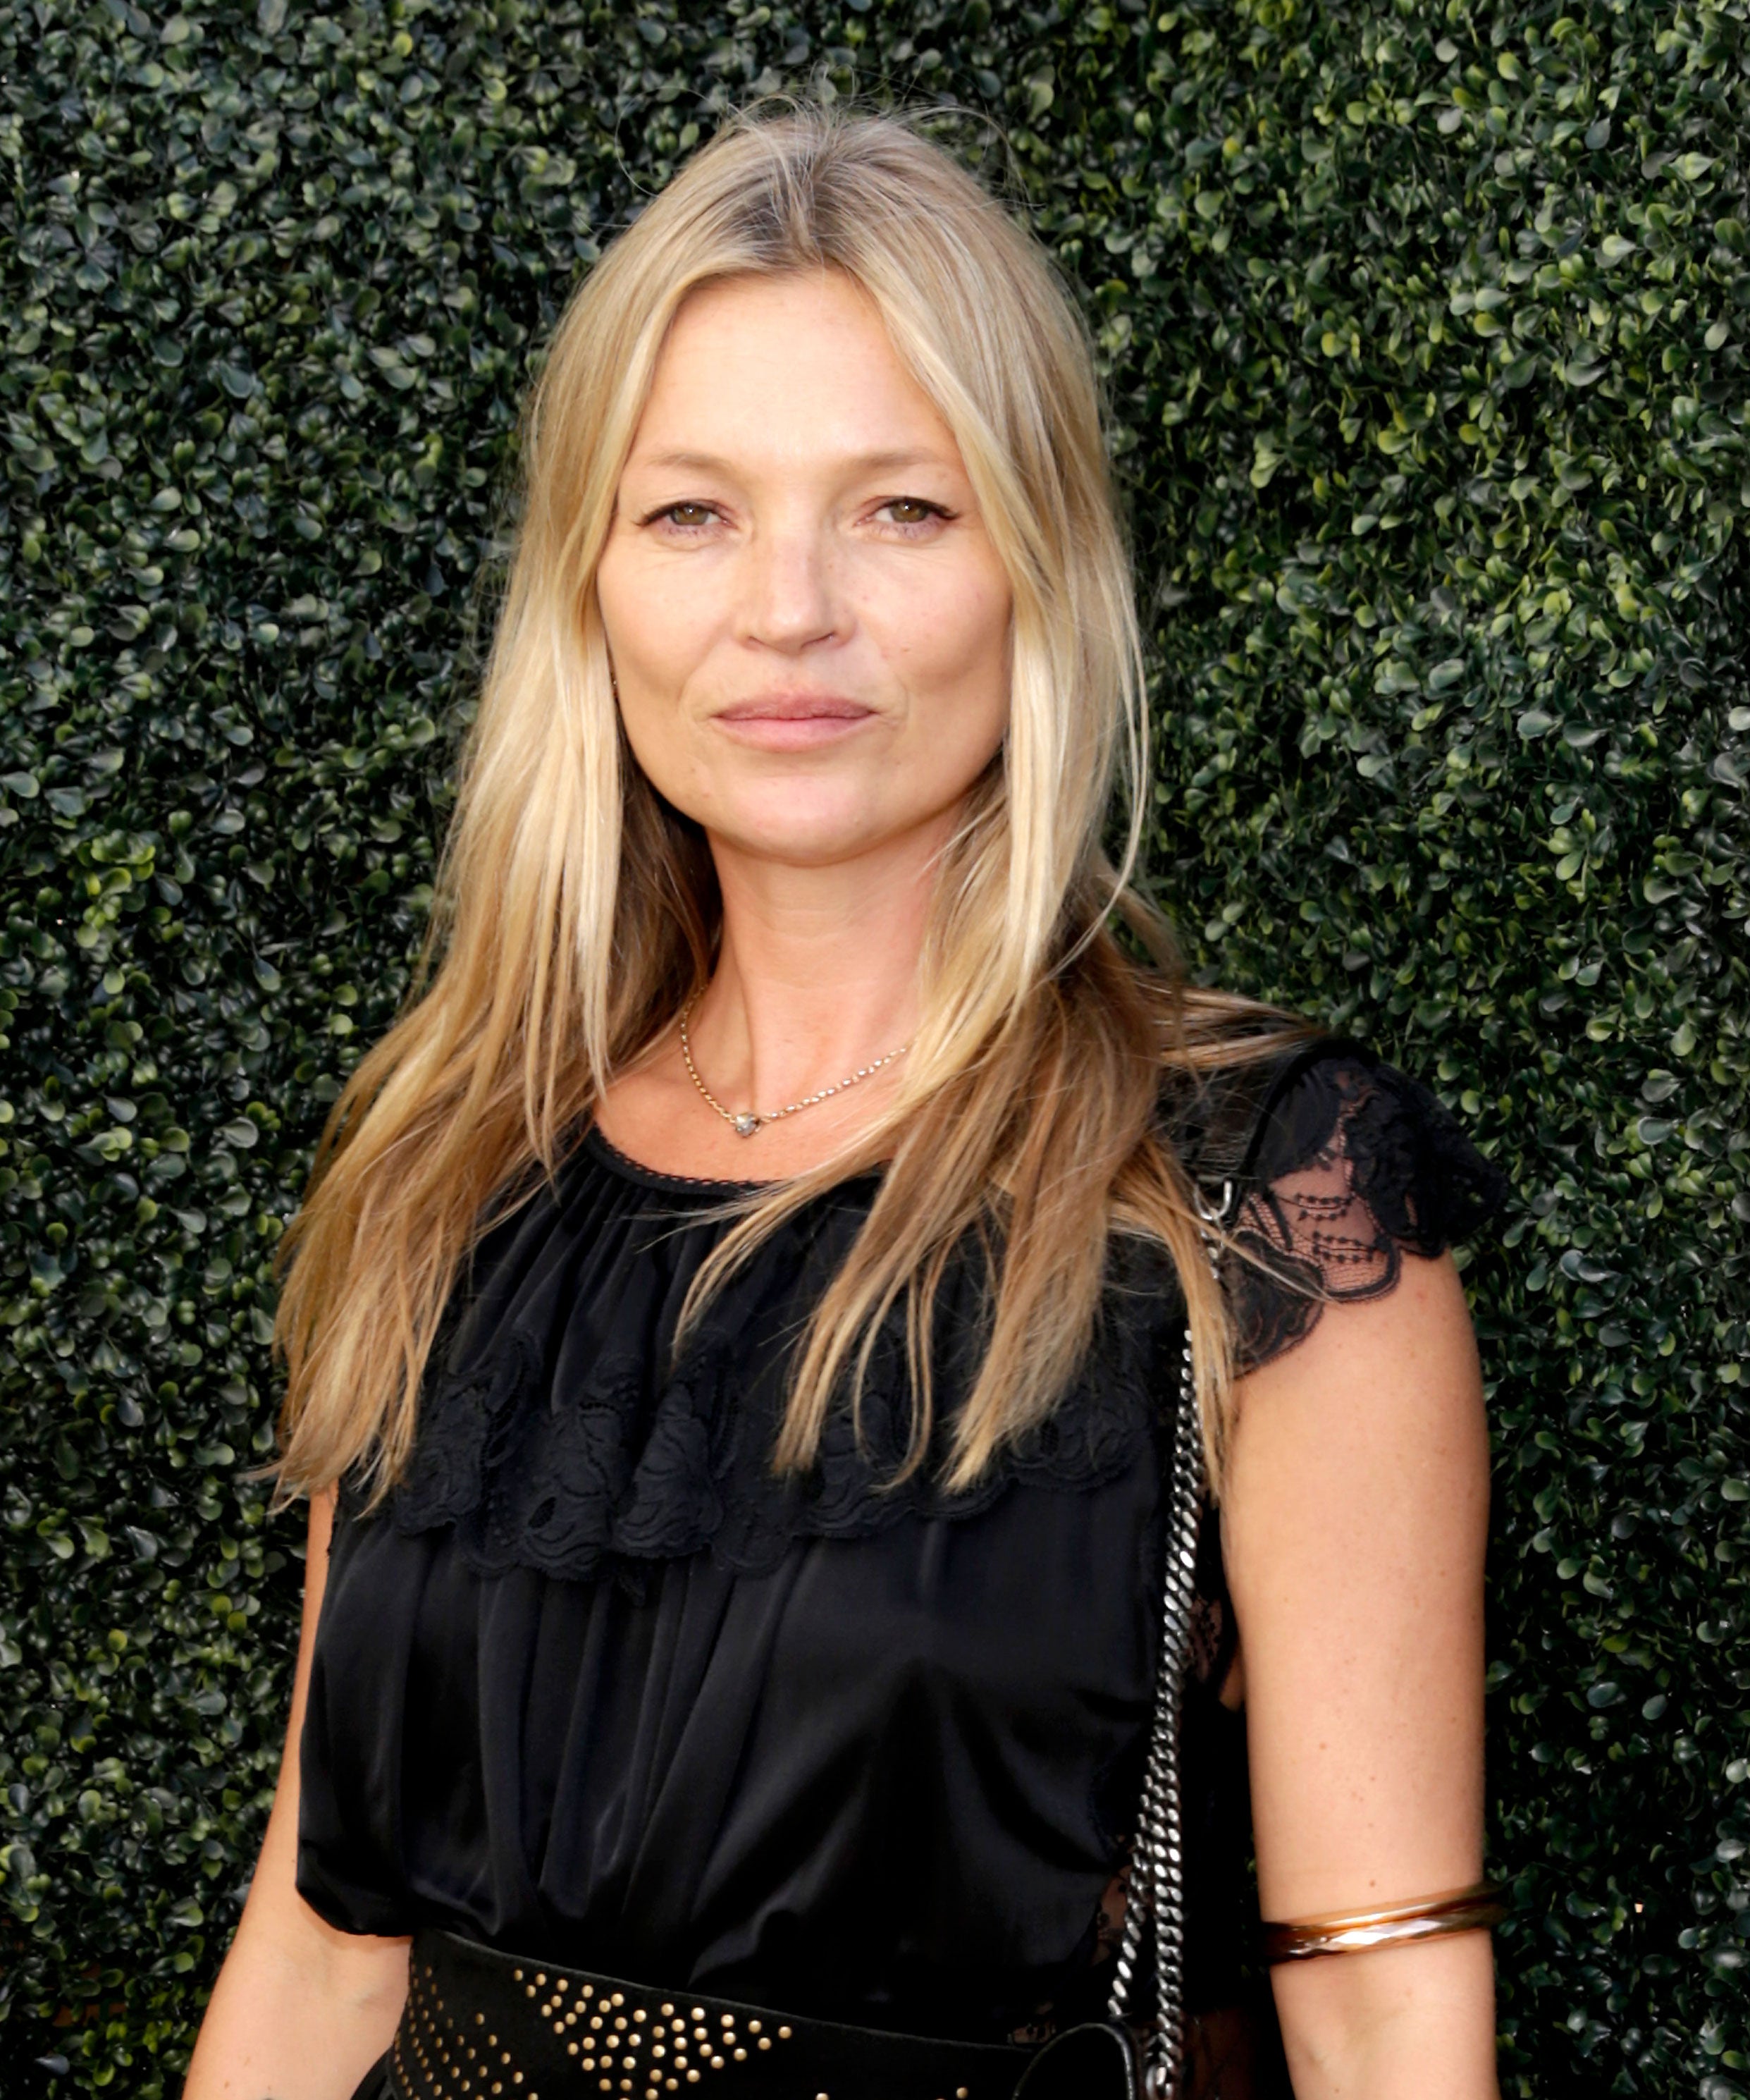 Kate Moss, Carine Roitfeld, & More Are Auctioning Their Closets For Charity